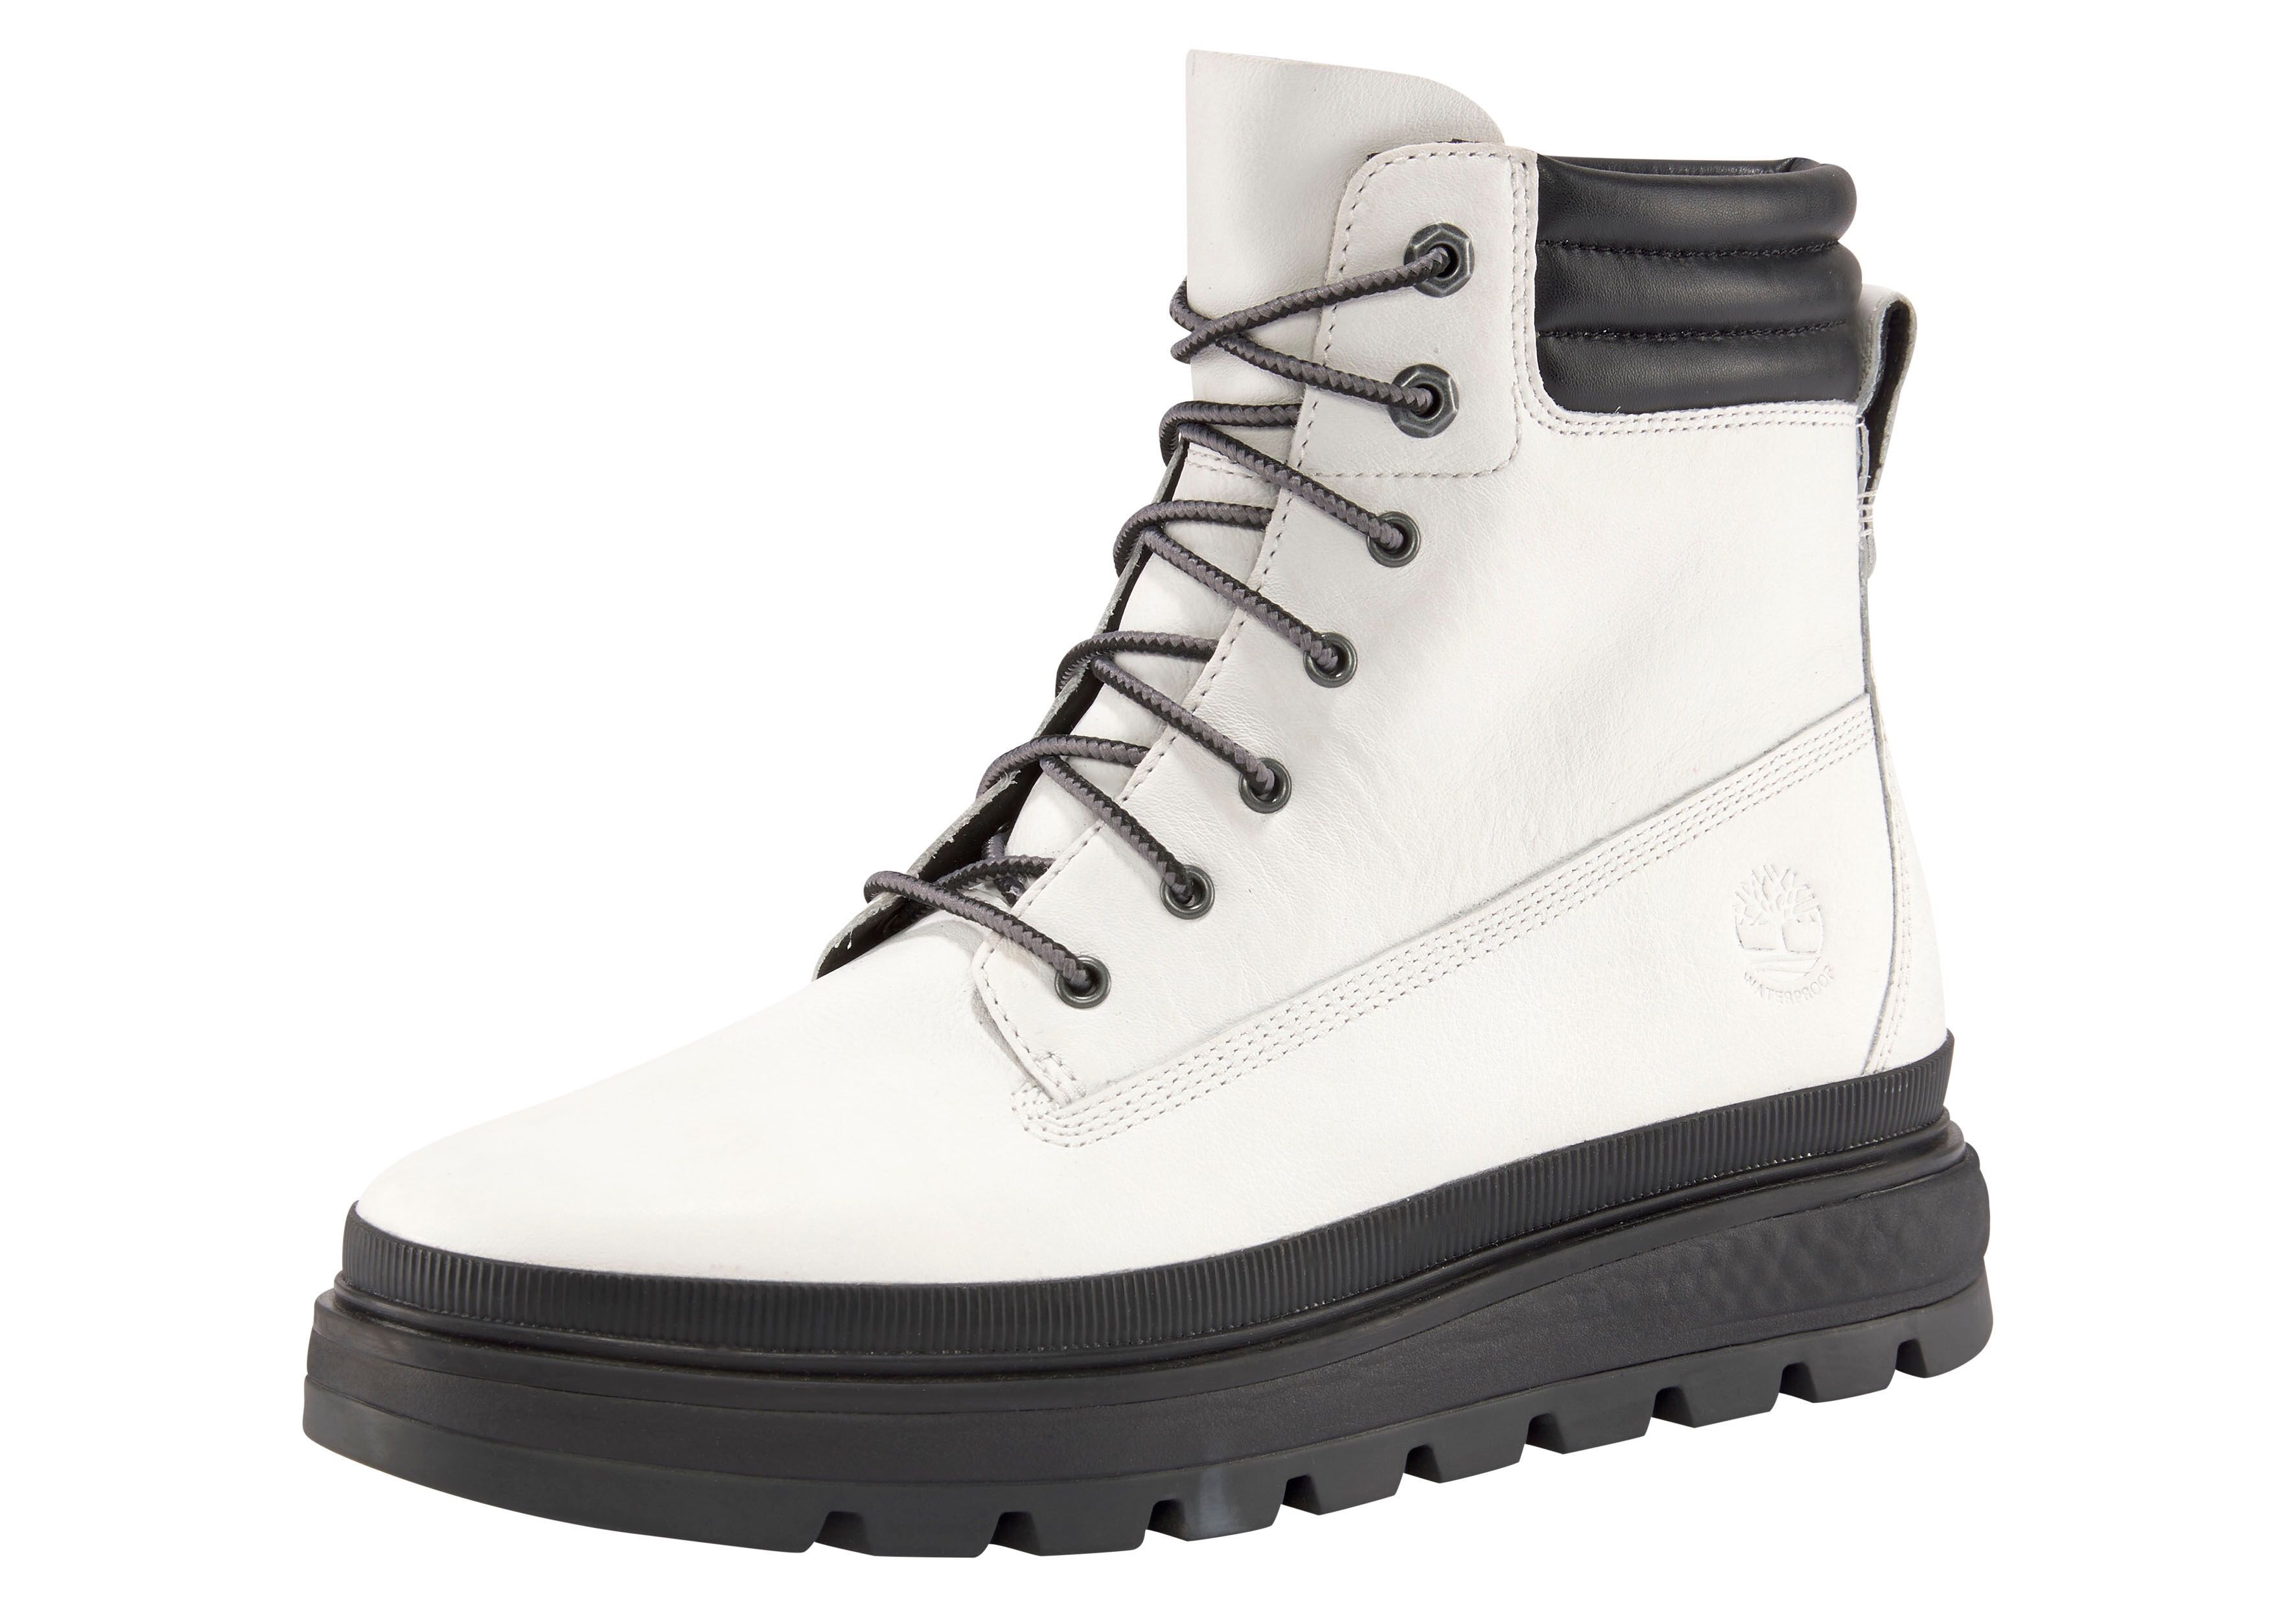 Timberland Schnürboots »Ray City 6 inch Boot WP« weiss  36 37 37,5 38,5 38 39,5 39 40 41,5 41 42